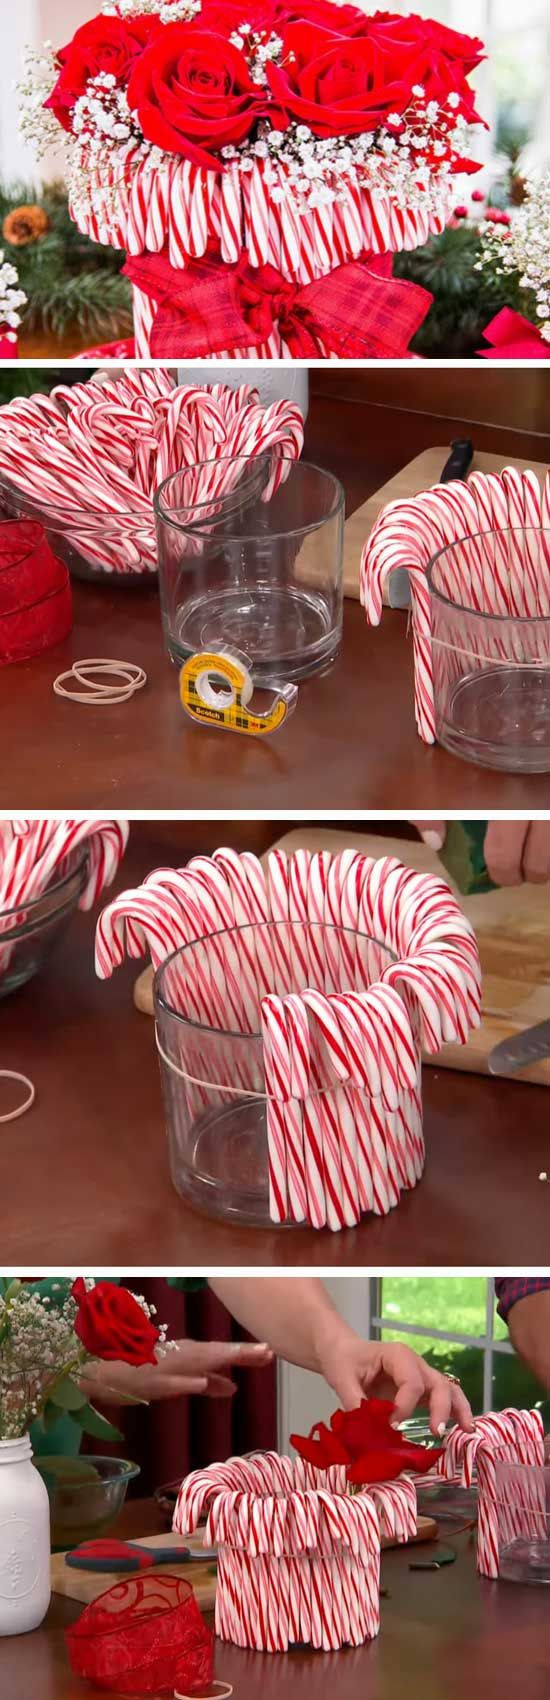 Christmas Party Theme Ideas For Adults
 Best 25 Candy cane crafts ideas on Pinterest